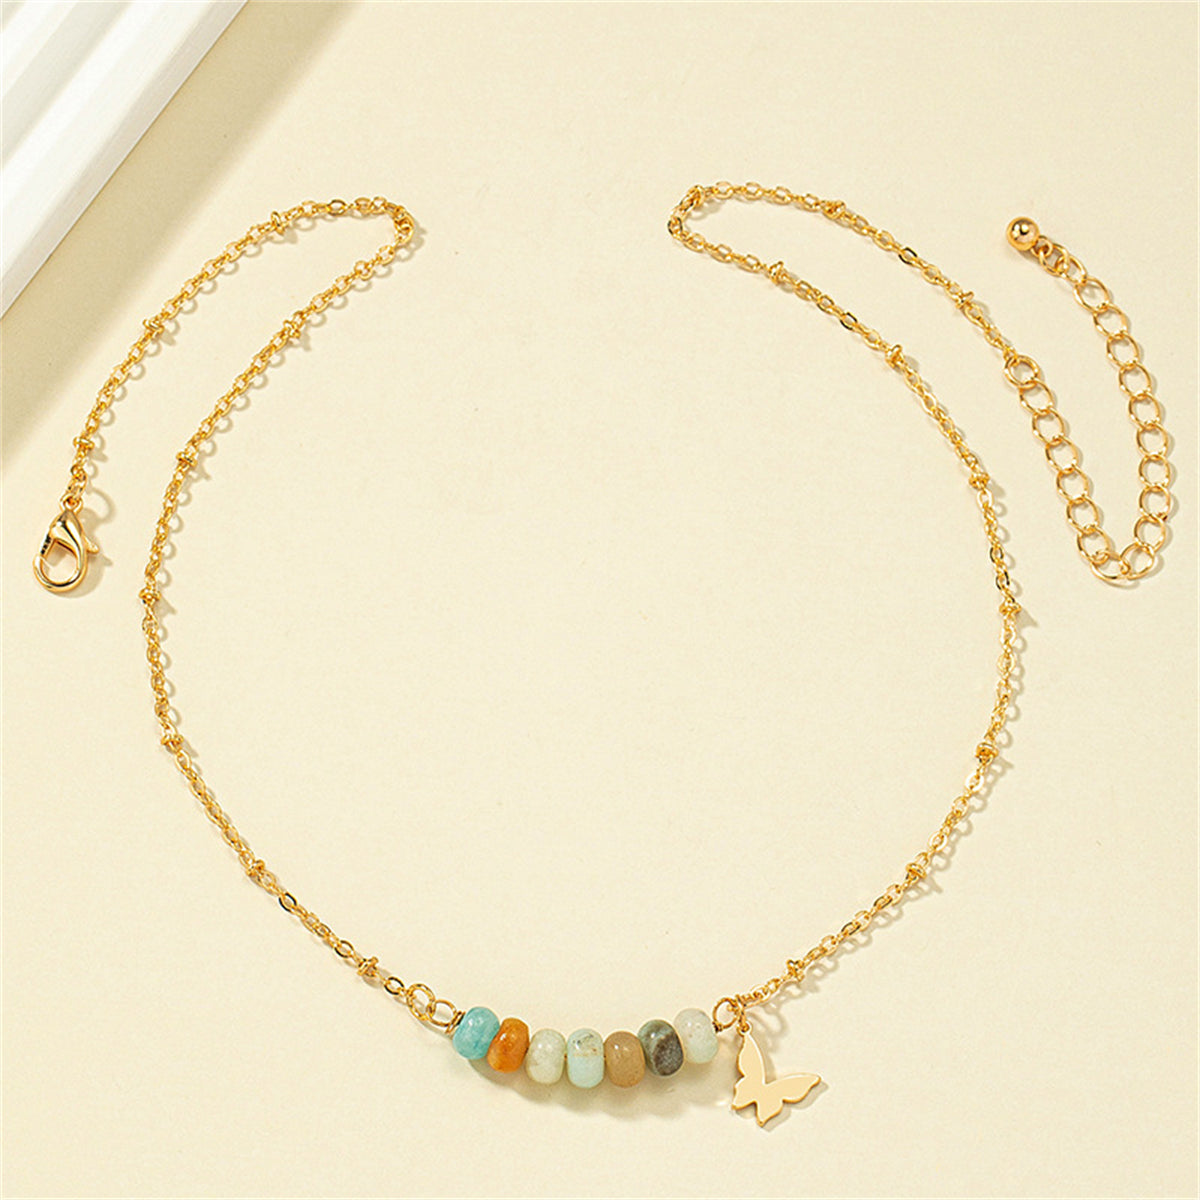 Quartz & 18K Gold-Plated Multicolor Bead Butterfly Necklace